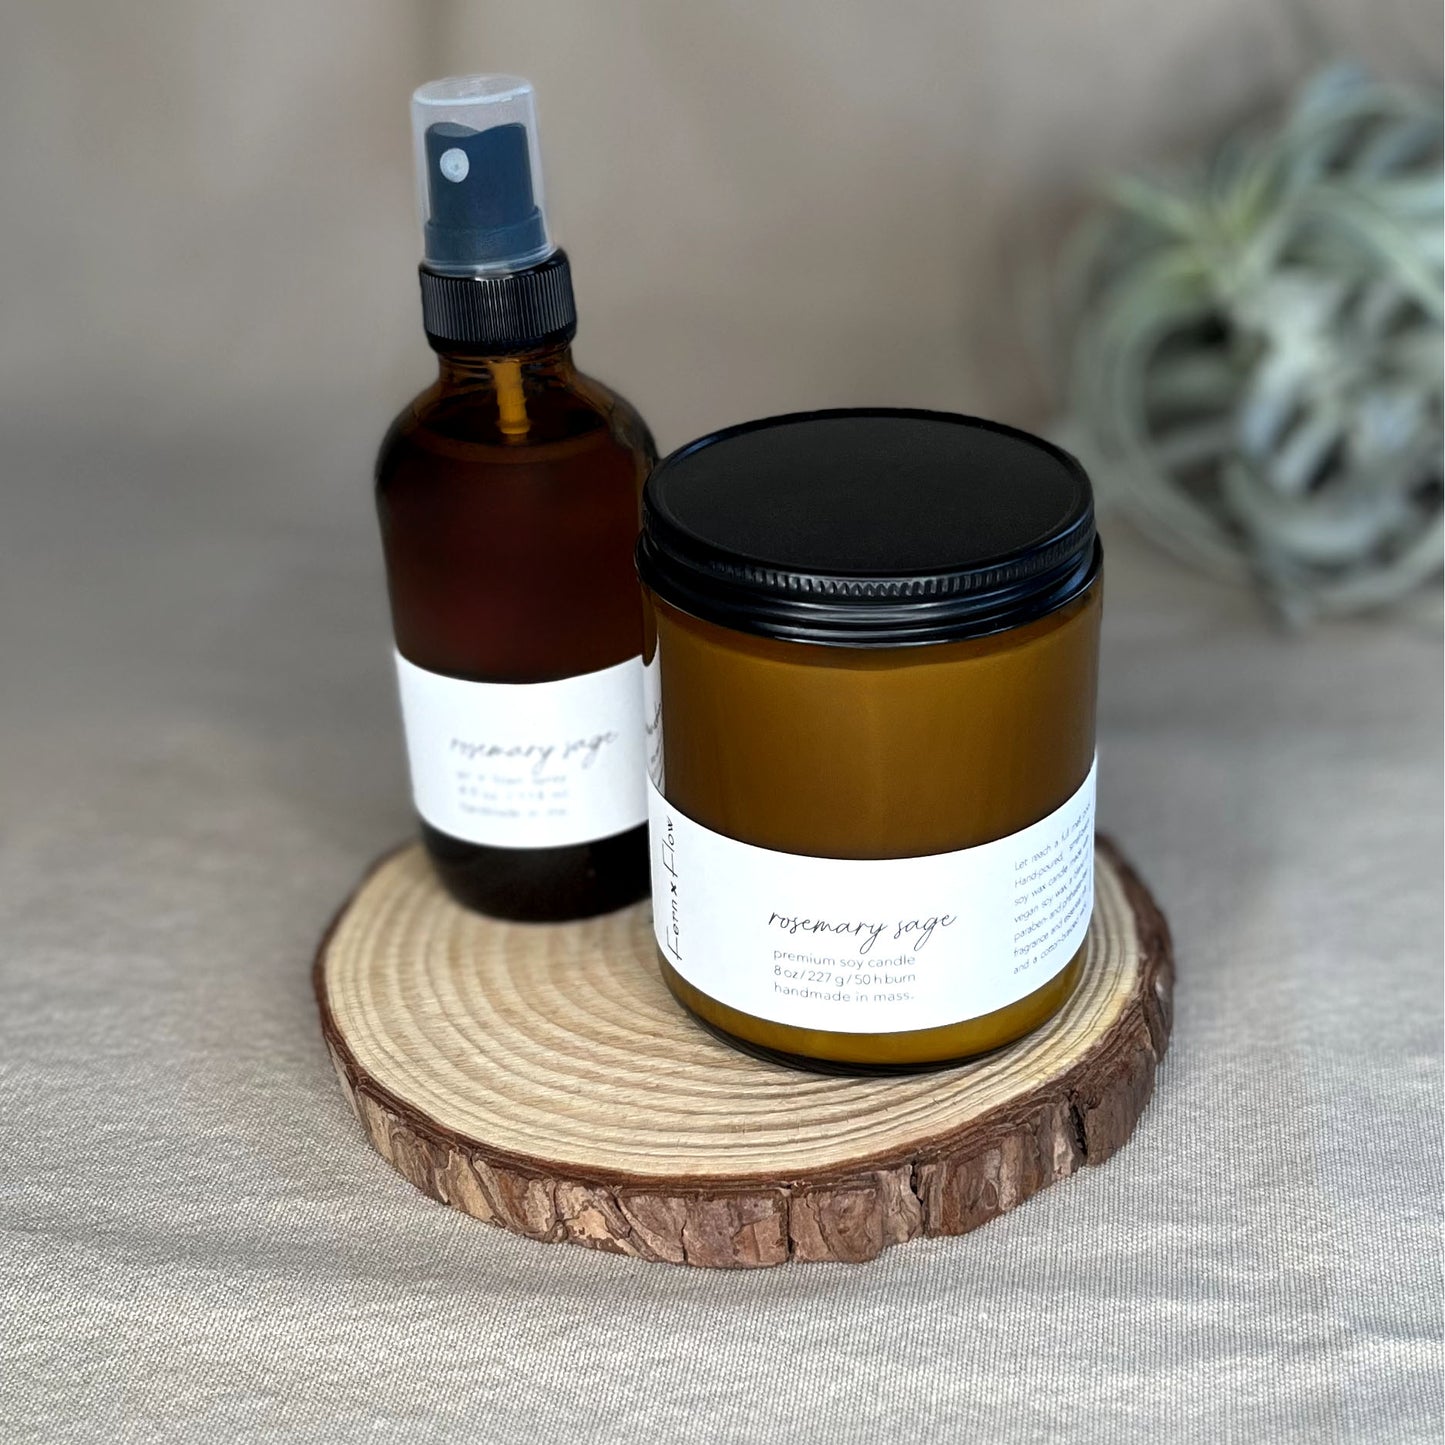 Fern x Flow Rosemary Sage soy candle and air + linen spray fragrance bundle.